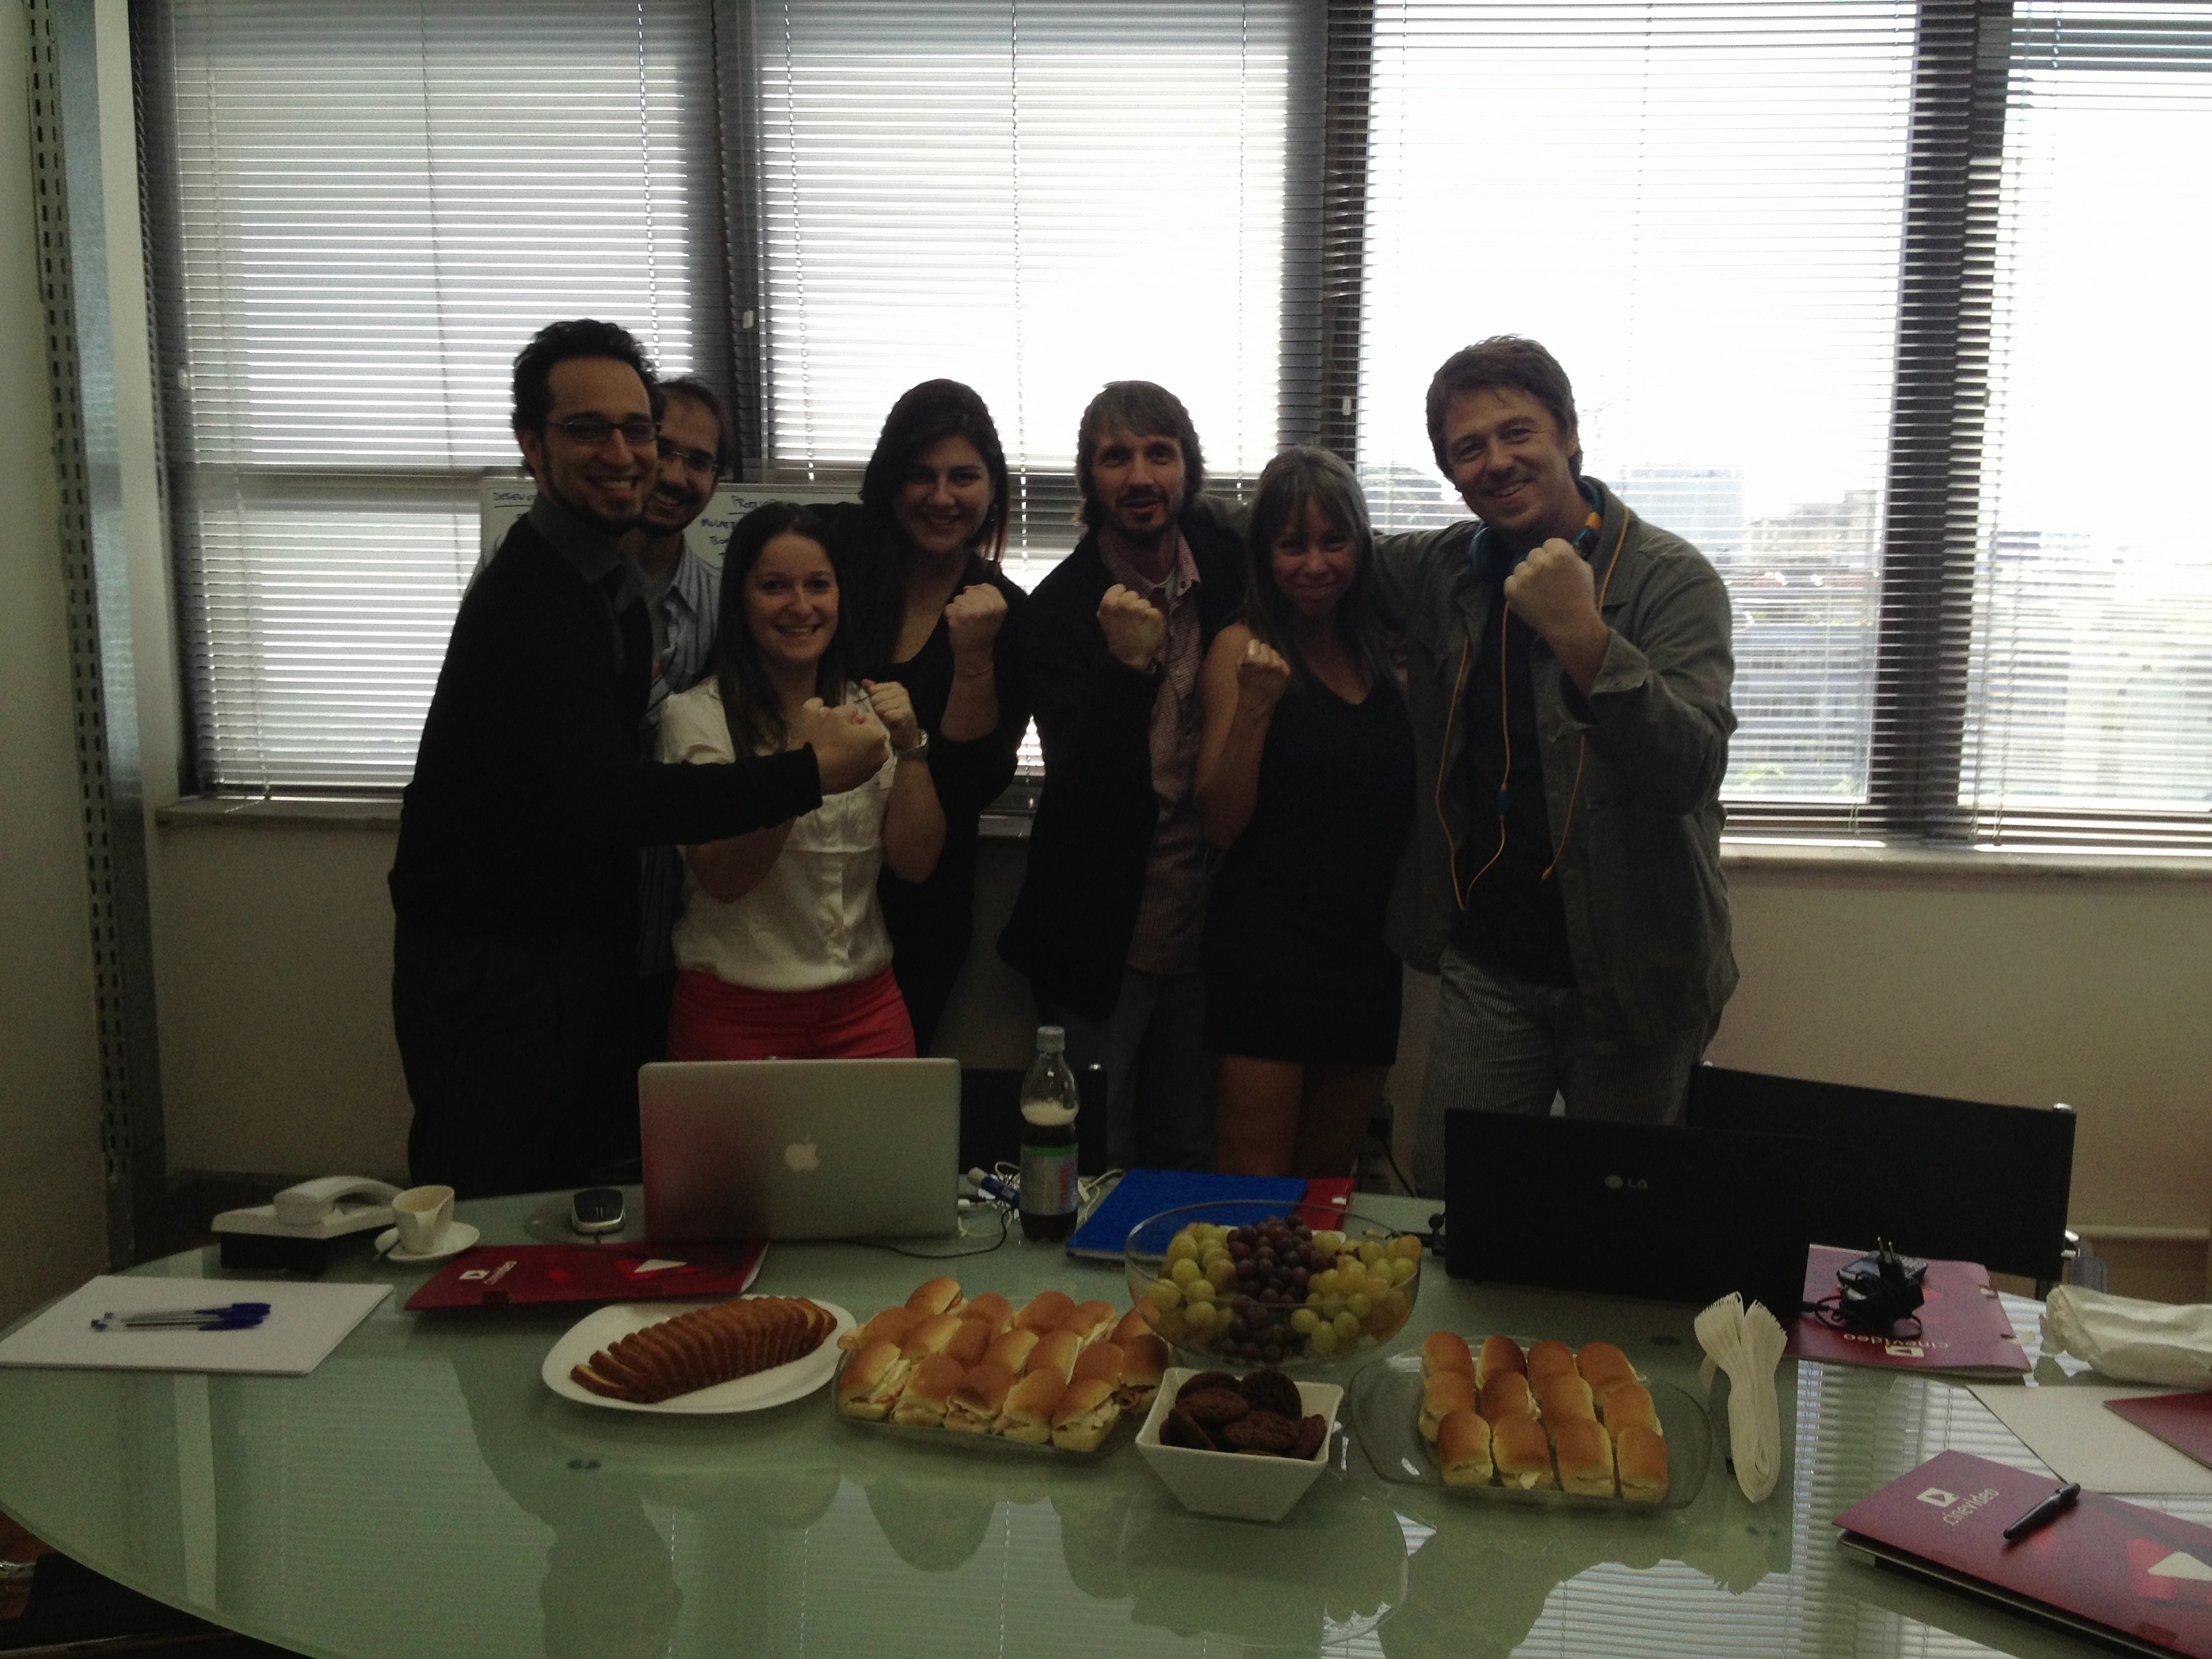 Celebrating the highest ever ratings in the history of The History Channel in Brazil for O INFILTRADO. (April 2013)